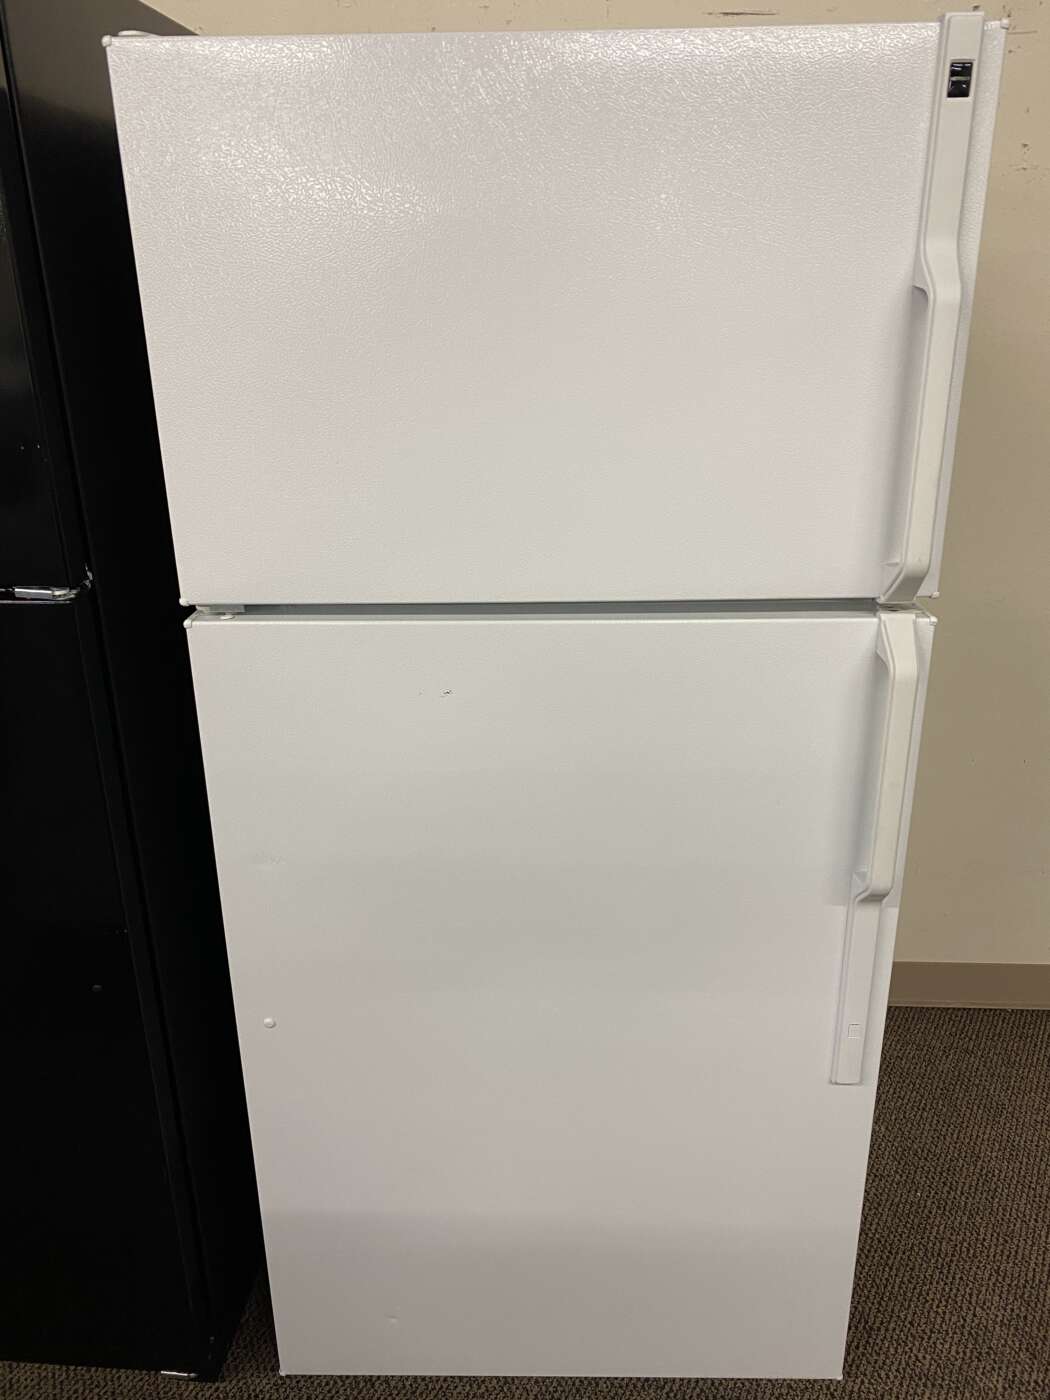 Reconditioned HOTPOINT 16 Cu. Ft. Top-Freezer Refrigerator – White